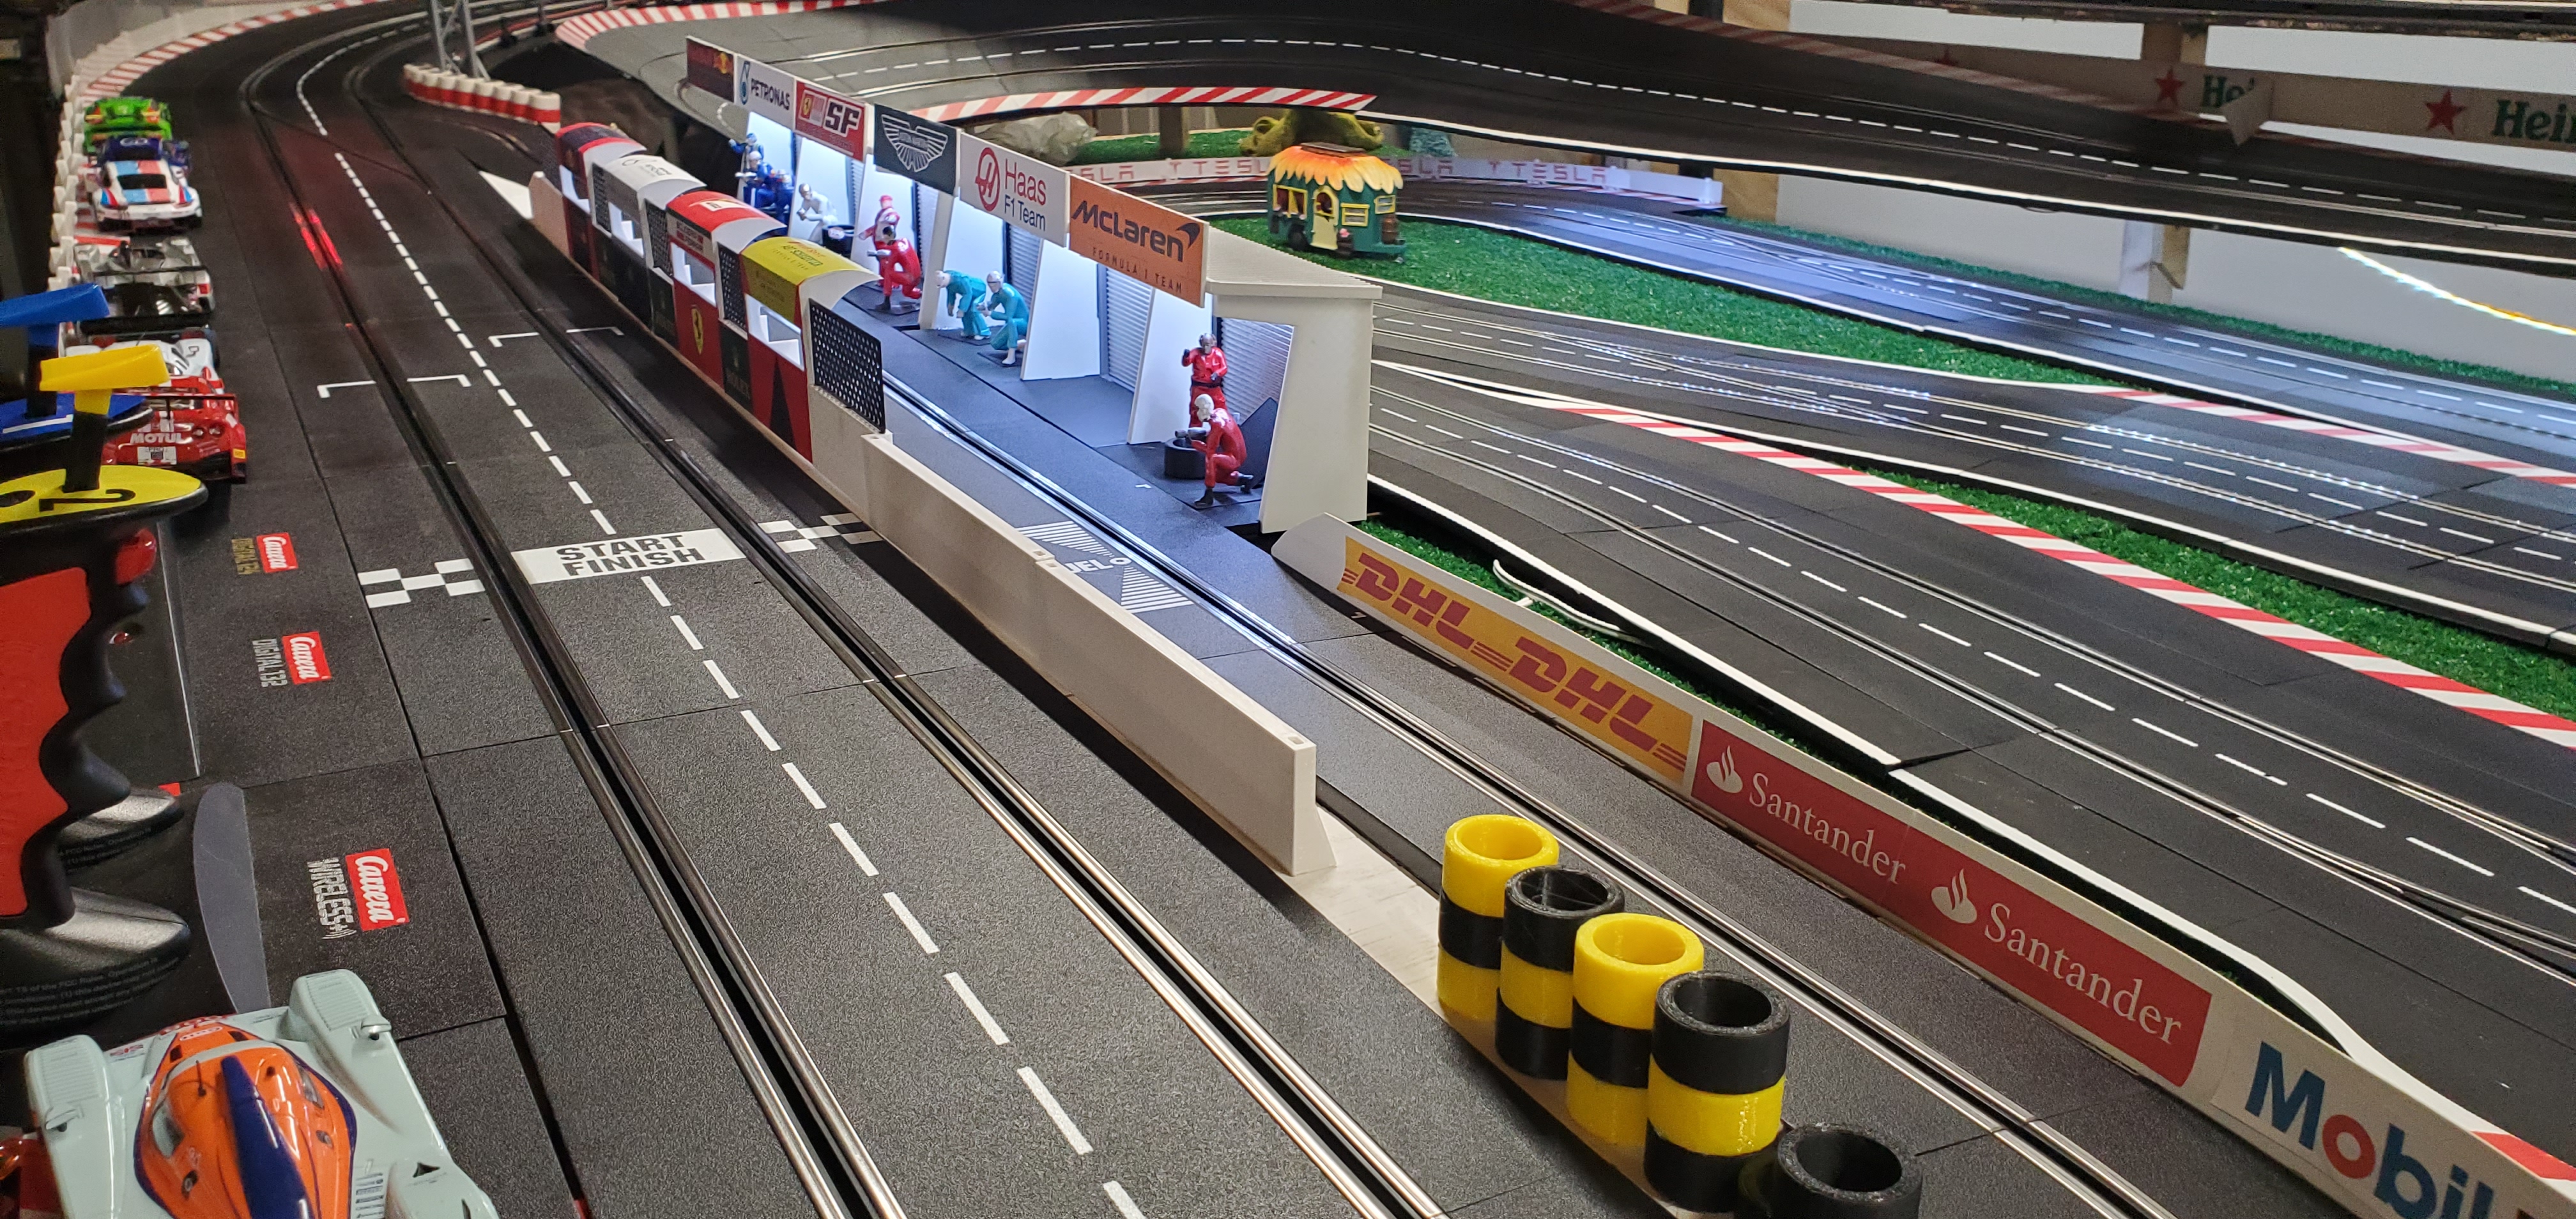 Slot Car Race Track with 3D printed Accessories